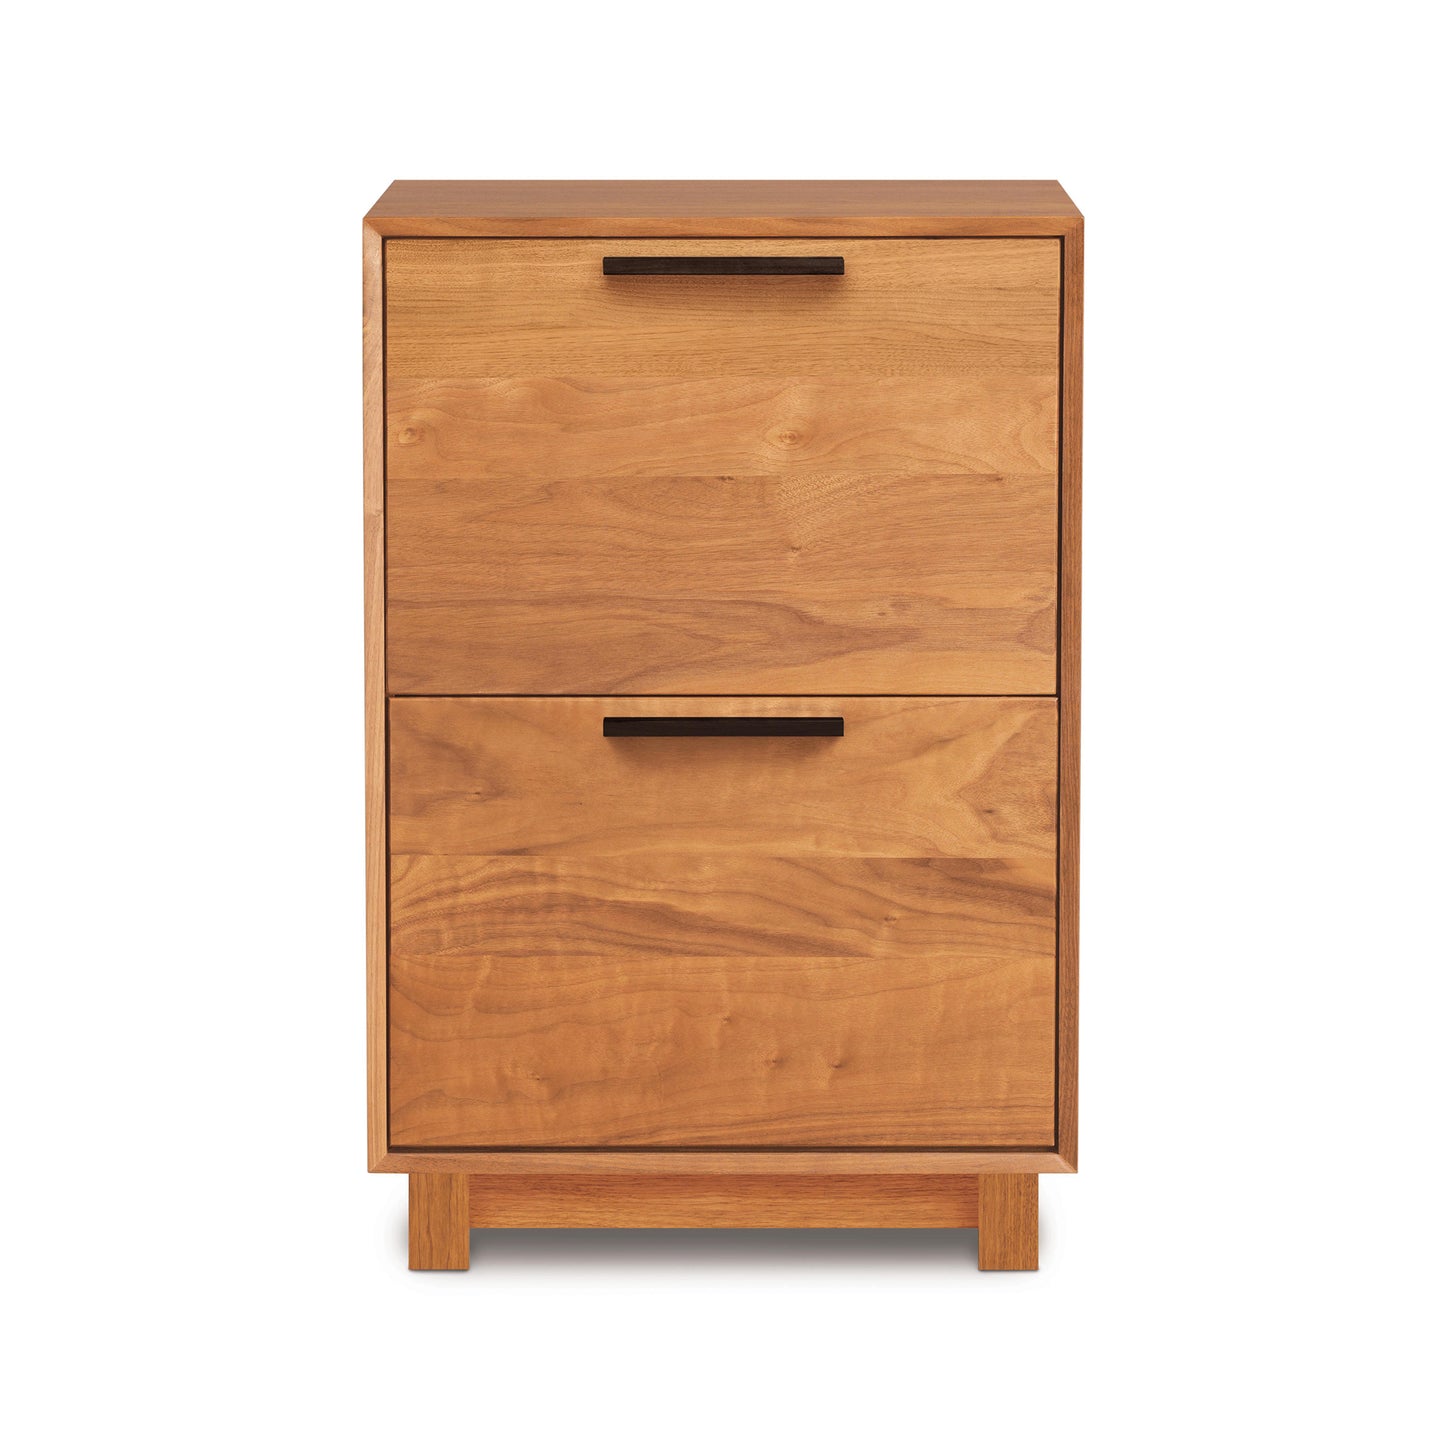 A Copeland Furniture Linear Narrow File Cabinet with a sleek wooden design and a black handle.